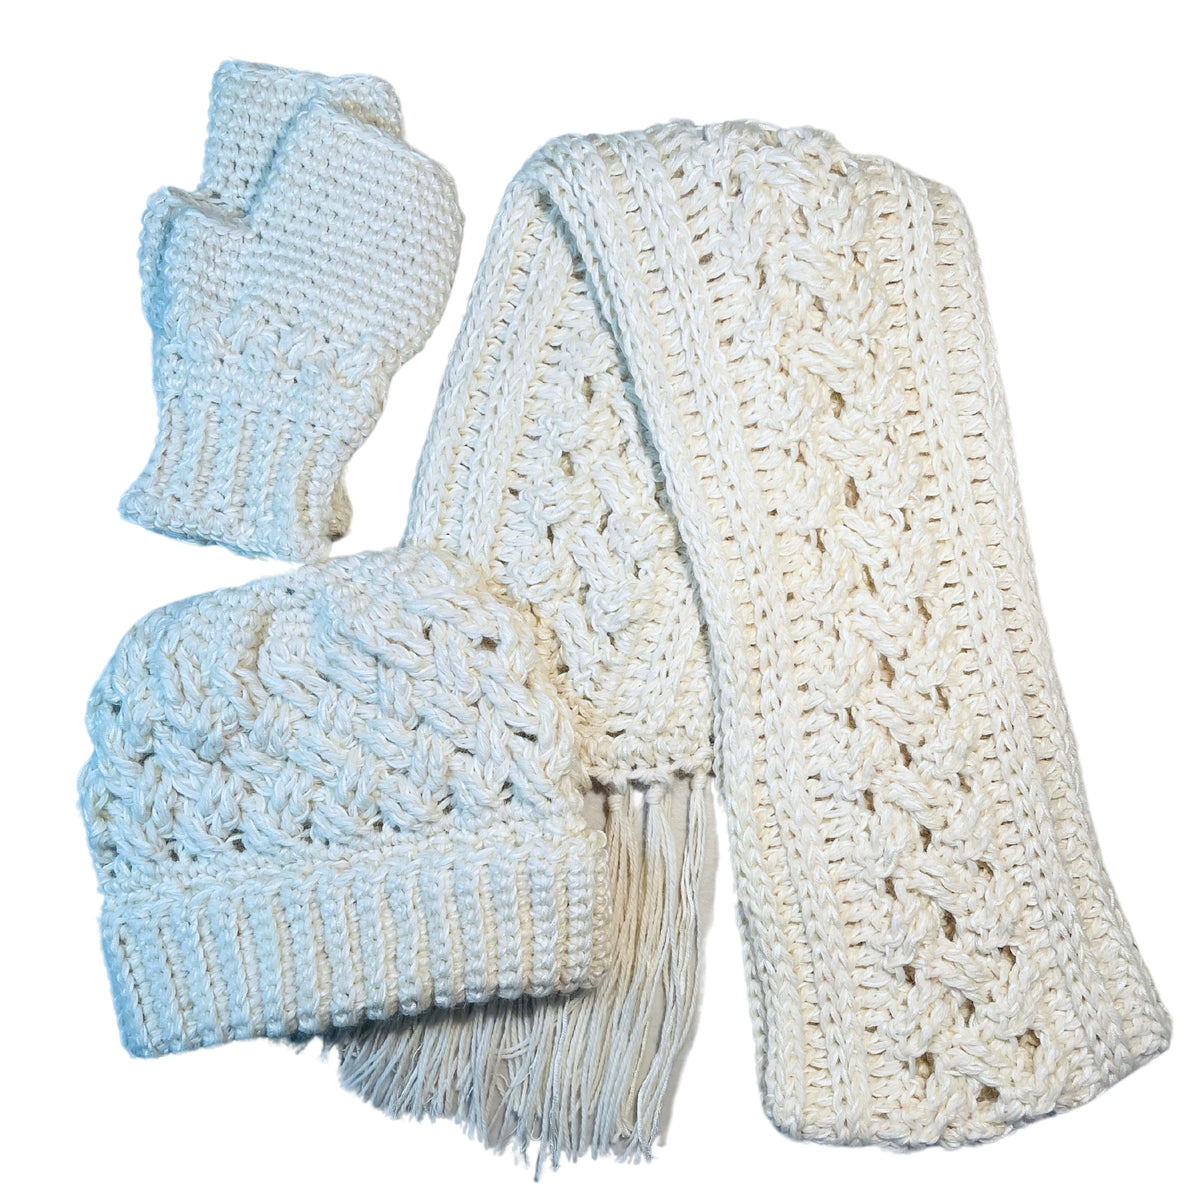 Cozy soft warm alpaca and bamboo matching set of ridge ribbed hat, scarf with long tassels, and ridge ribbed mittens for winter fashion. Handmade knitted crochet items made from yarn in the color natural white.